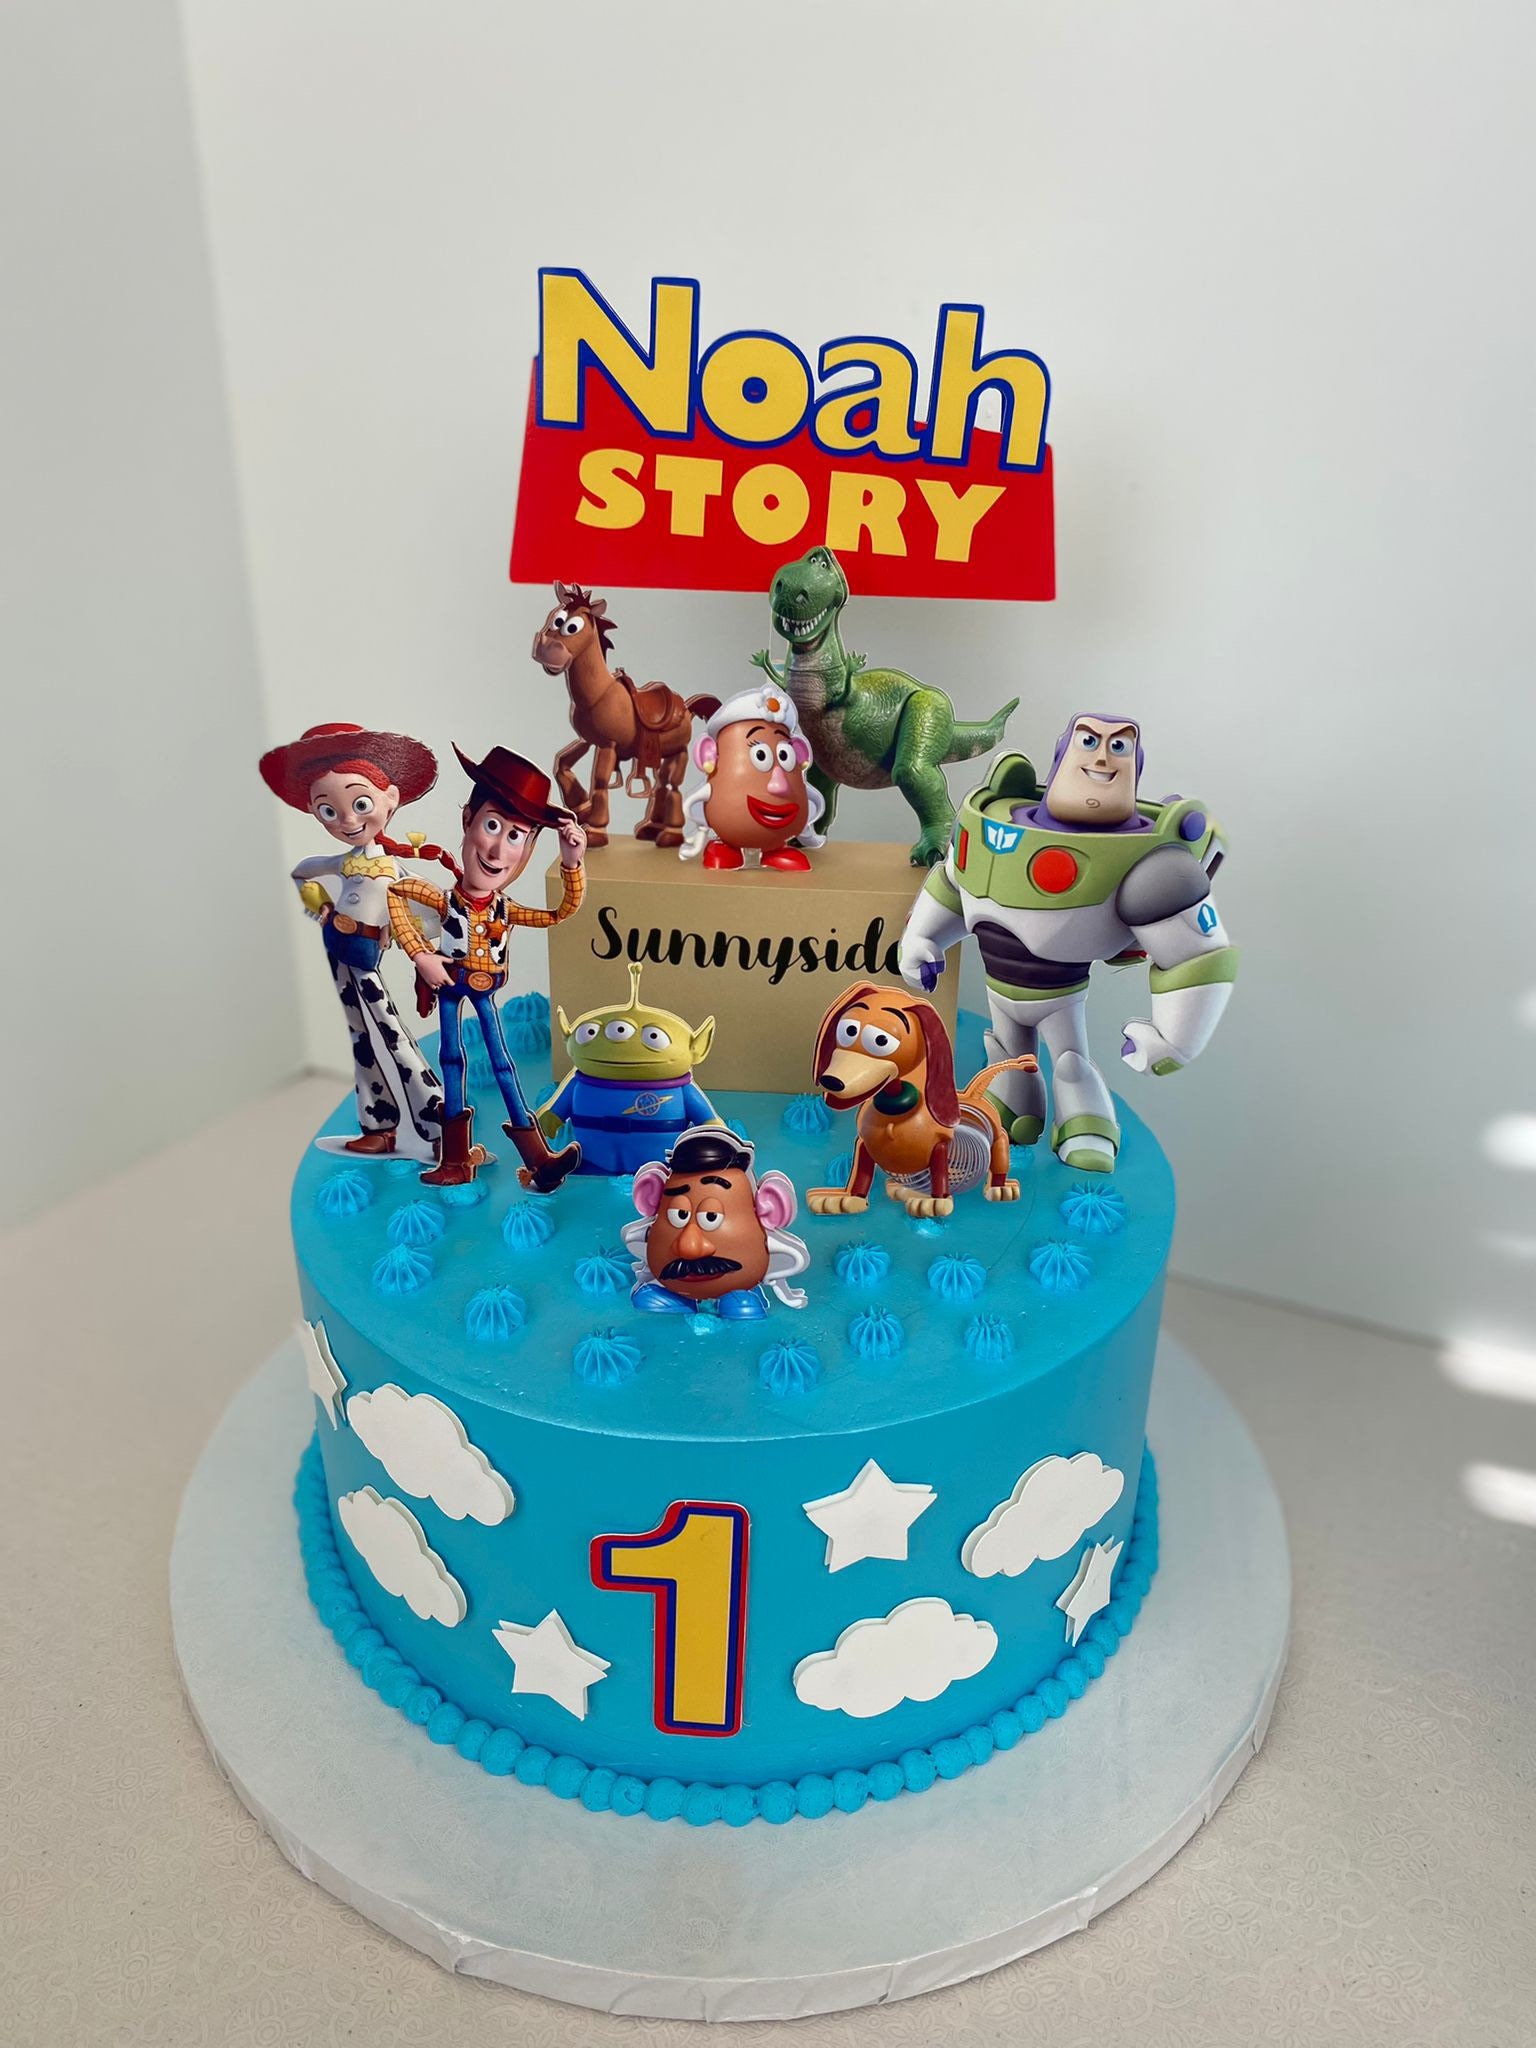 Gâteau anniversaire Toy Story